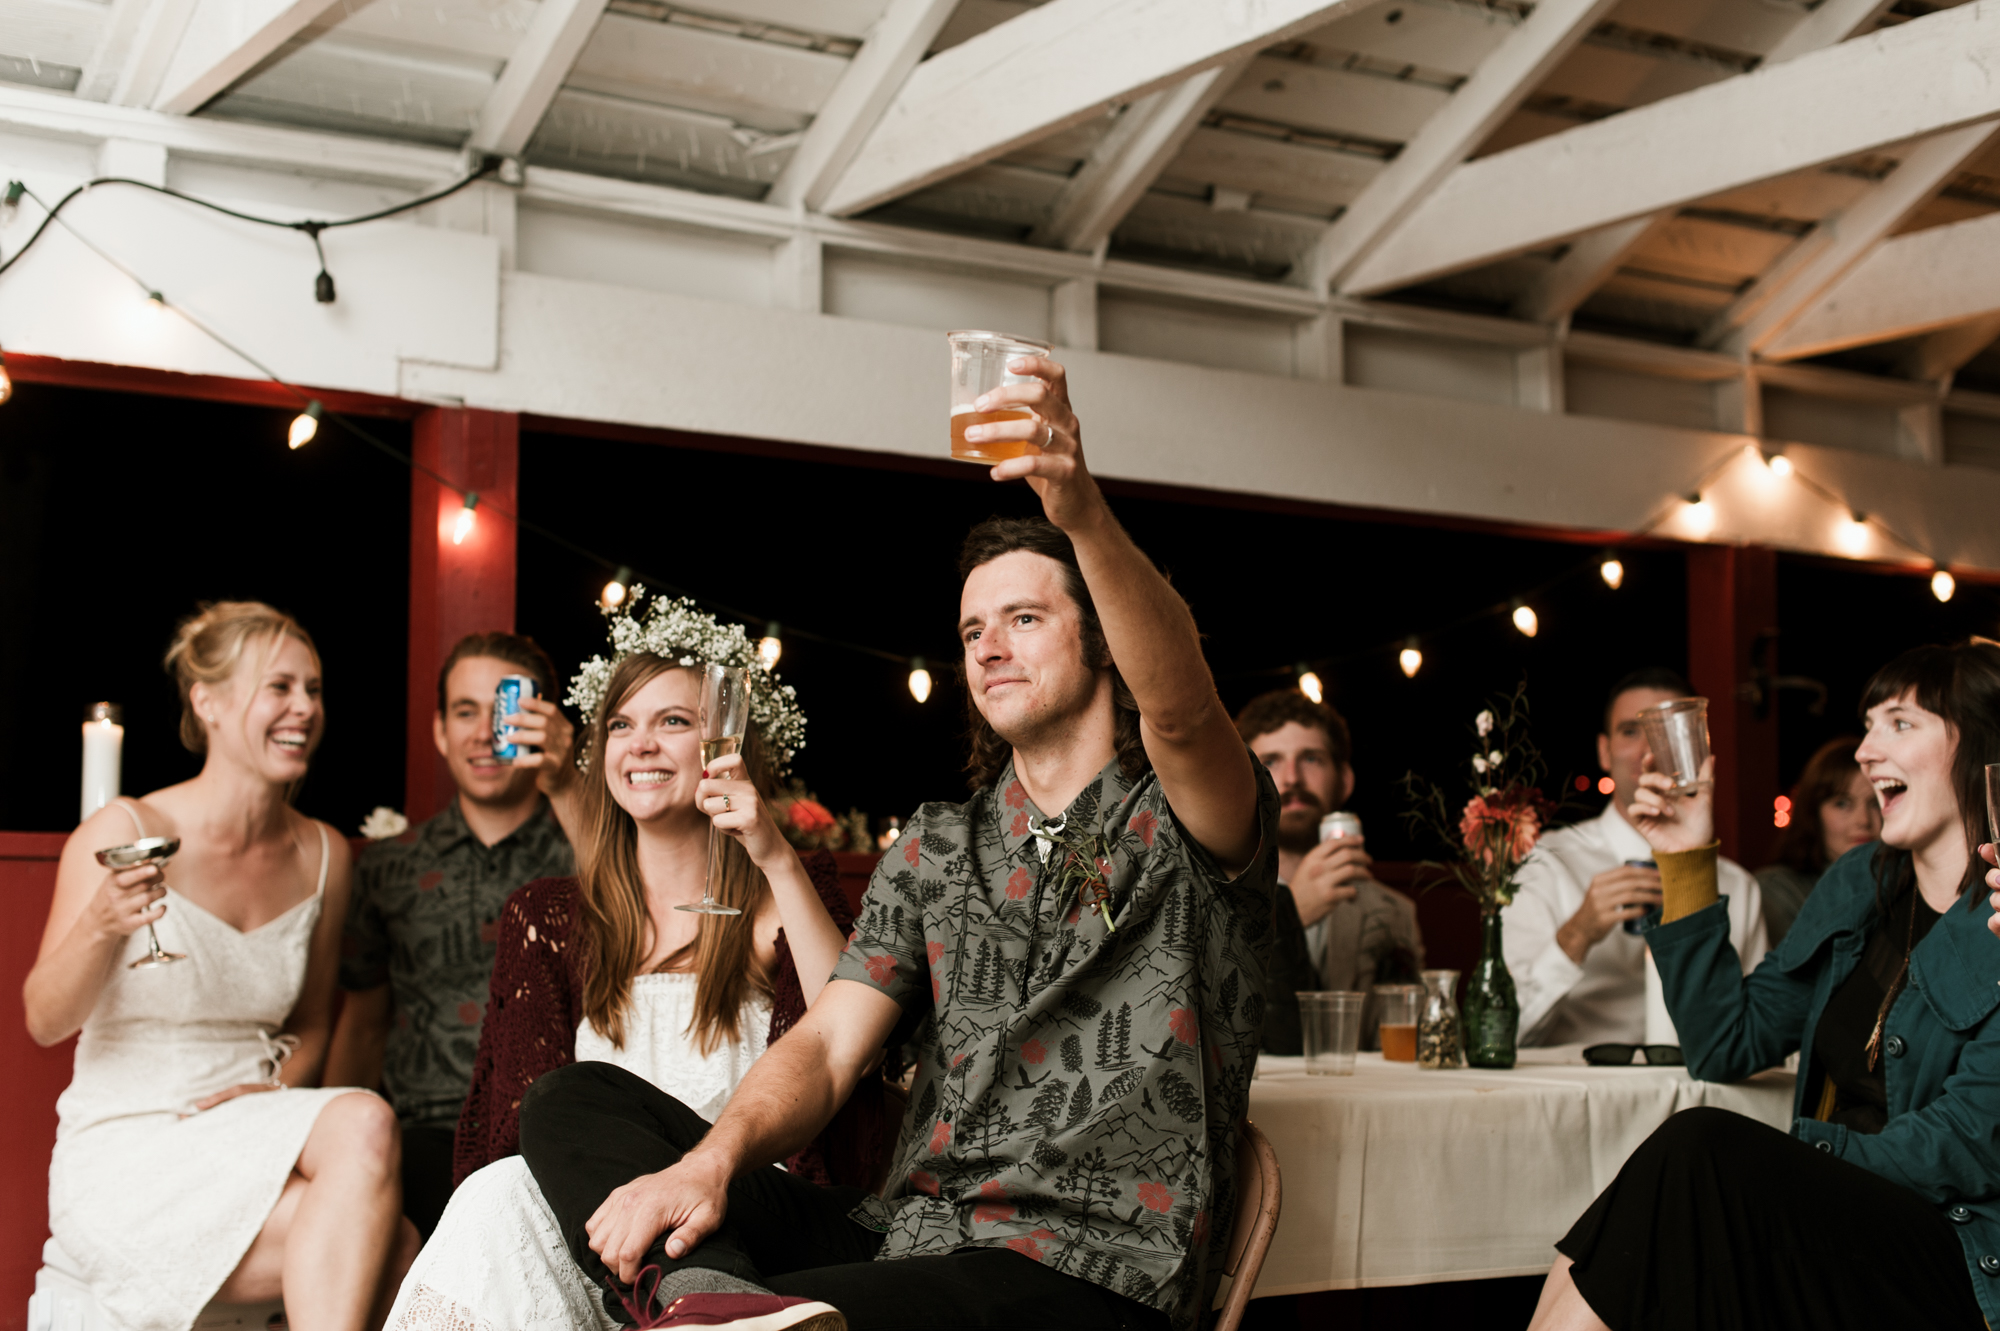 The bride and groom raise their glasses for a toast. By Sou'Wester wedding photographer Briana Morrison